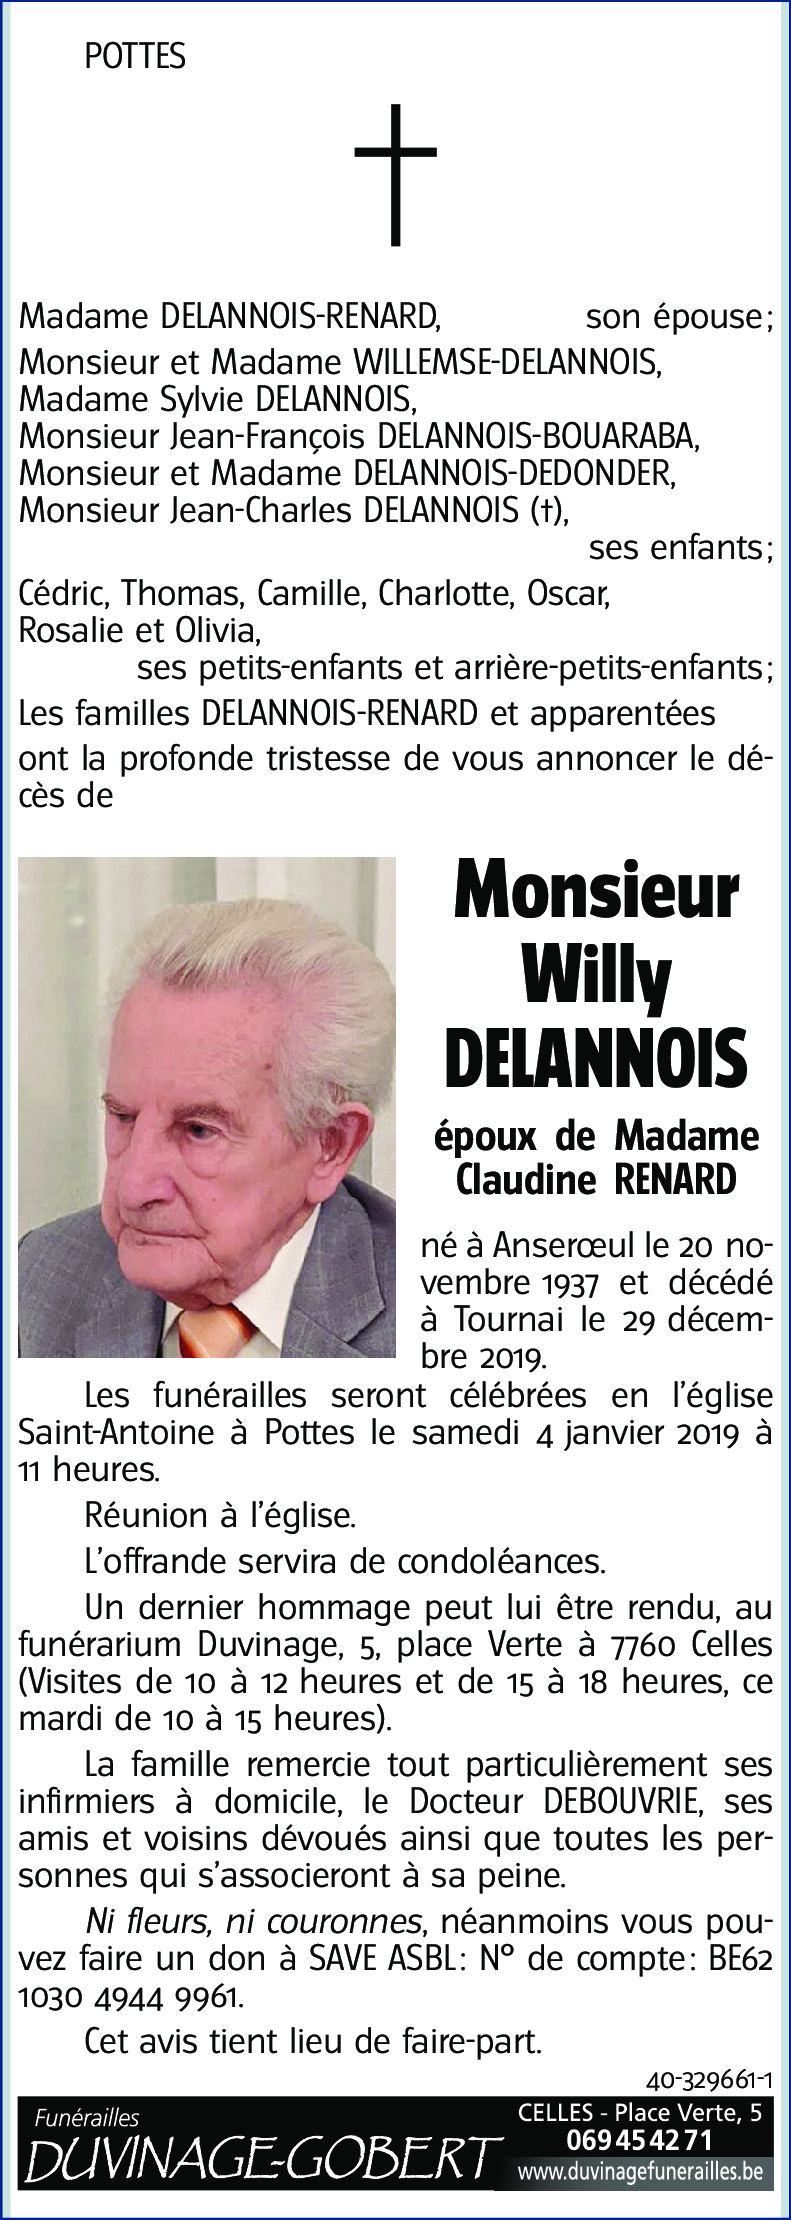 Willy DELANNOIS